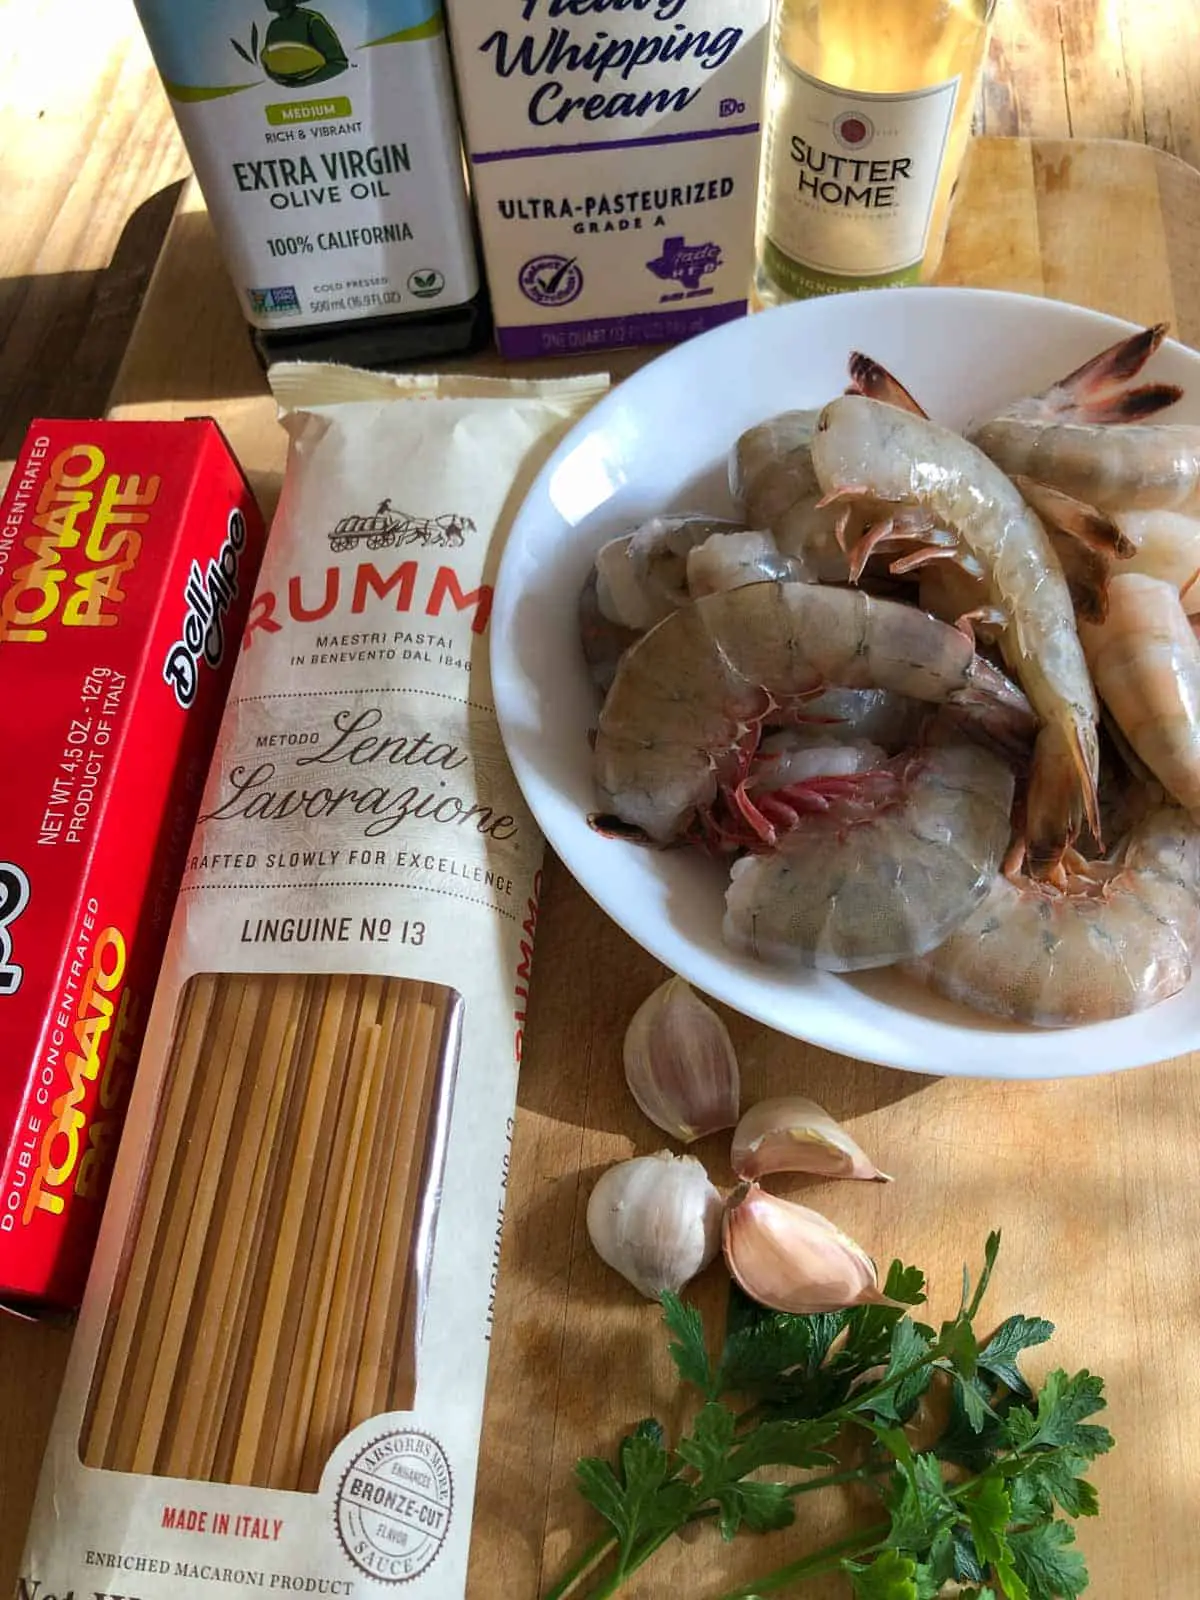 Shrimp with shell on in a white bowl, bottle of white wine and extra virgin olive oil, carton of heavy whipping cream, box of tomato paste, package of linguine, 4 garlic cloves and Italian parsley